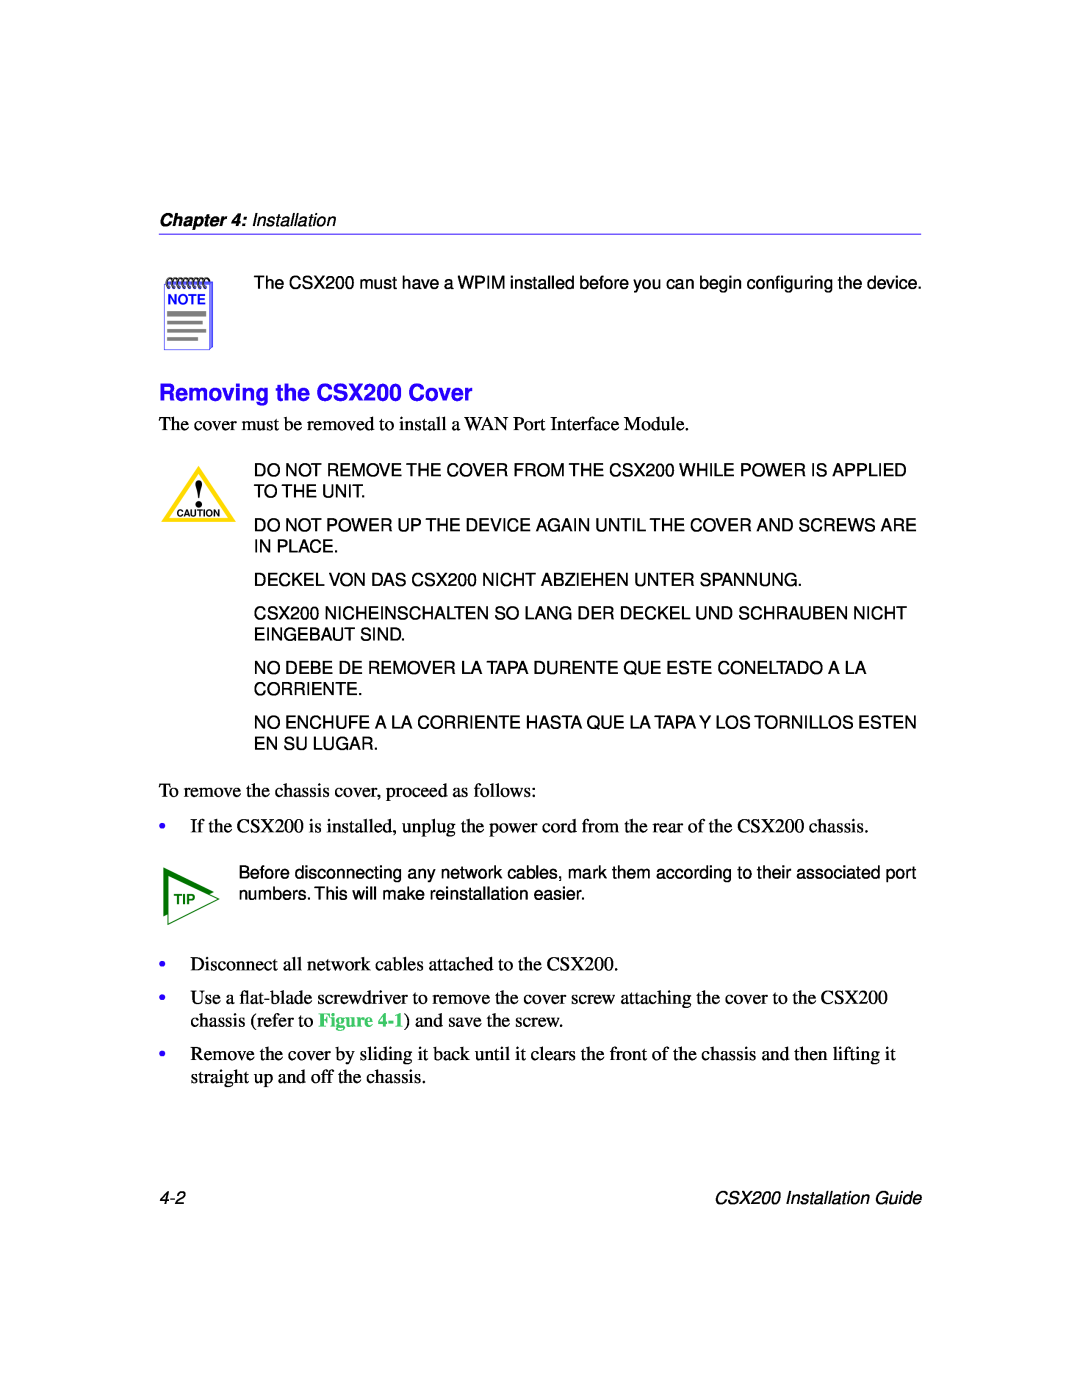 Cabletron Systems manual Removing the CSX200 Cover 